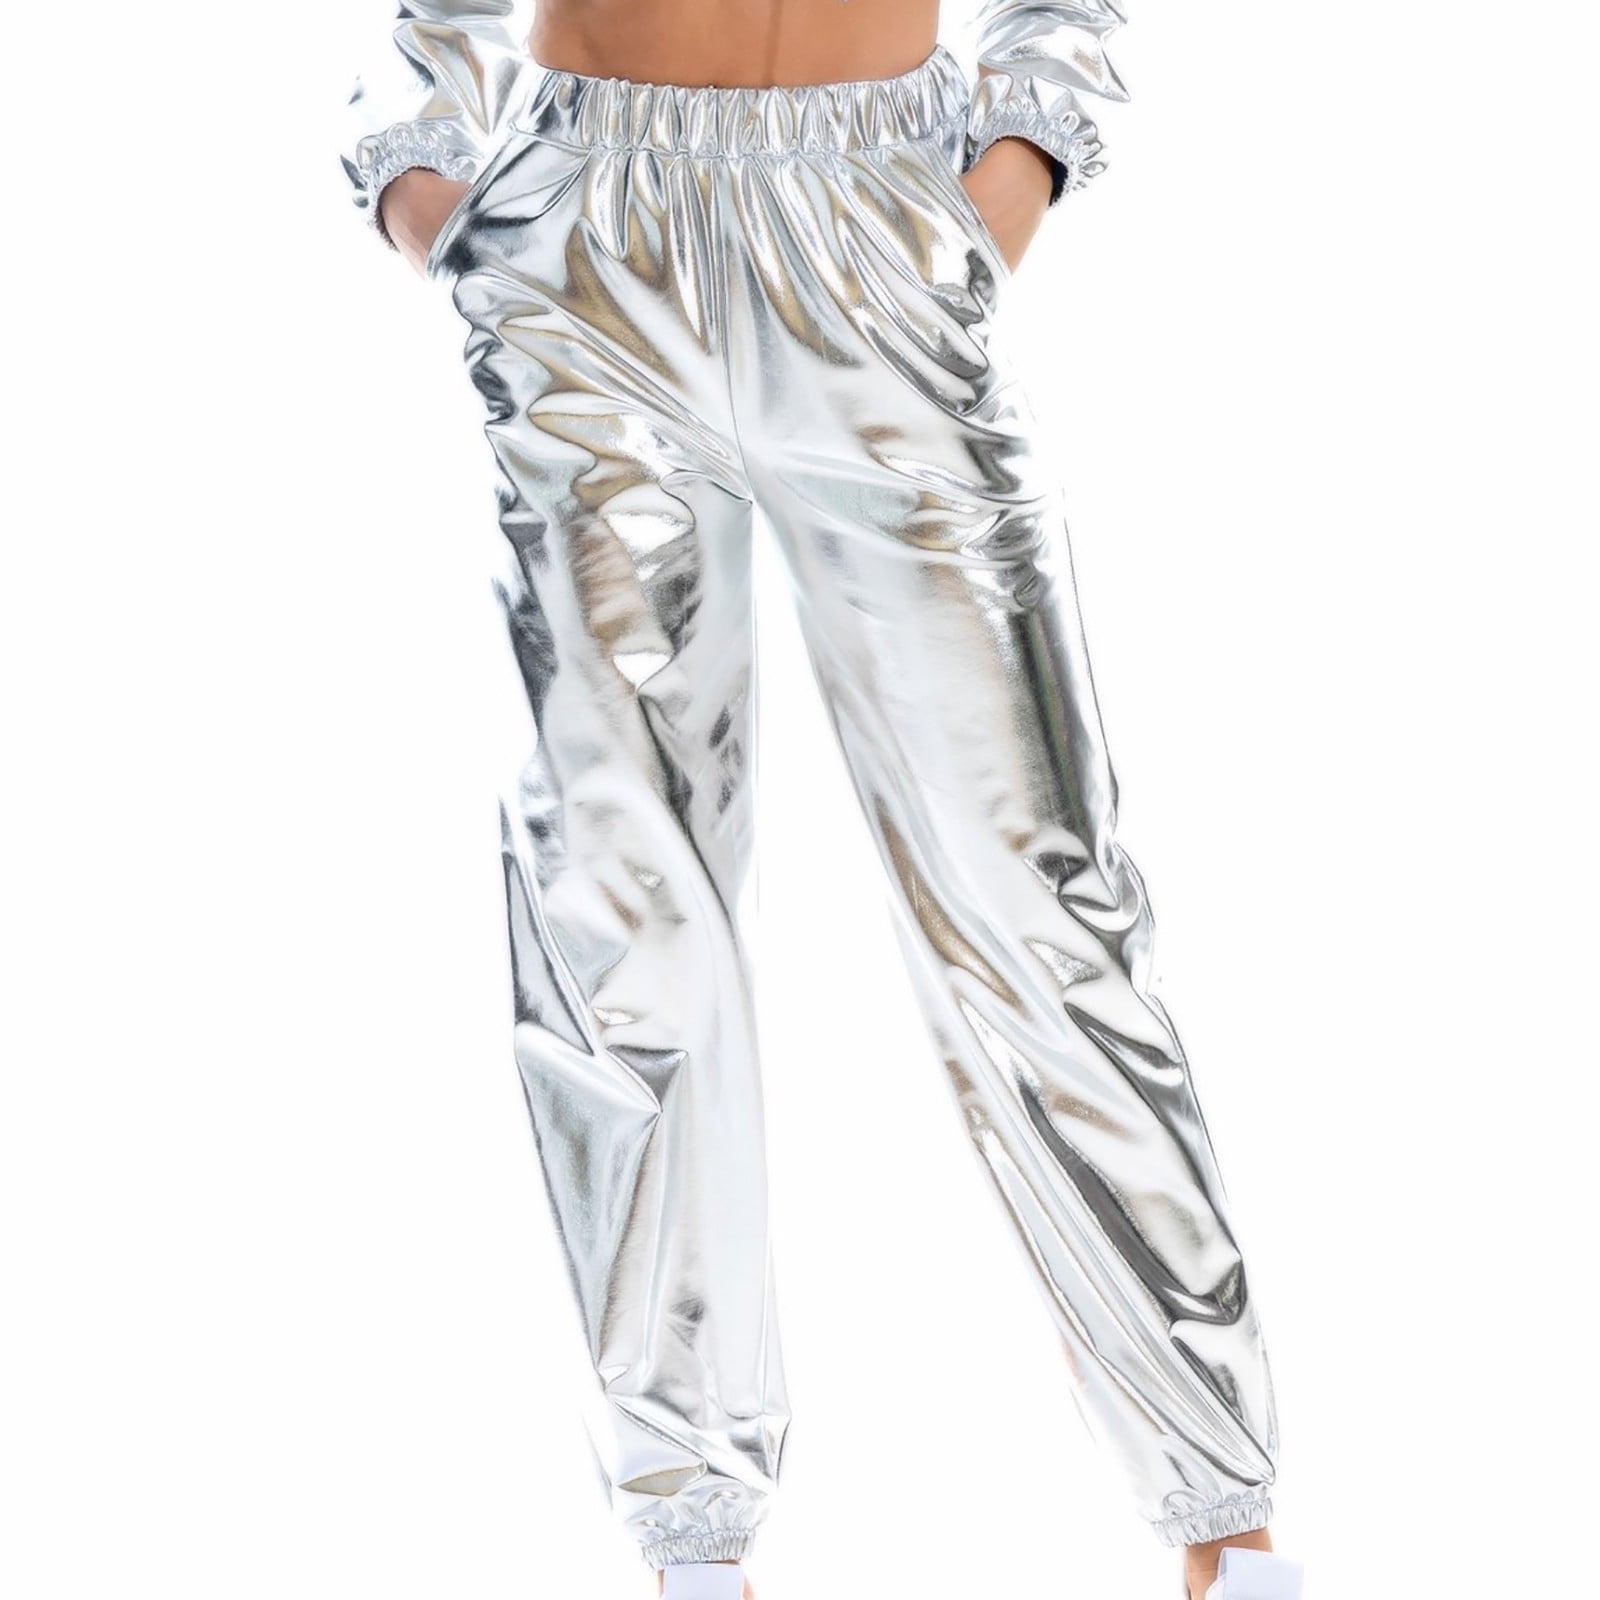 SSAAVKUY Women Deals Womens Fashion Bottoms Club Shiny Causal Pants Sports  Active Pants Pencil Pants Comfy Holiday Young Girl Dressy Fashion Bottoms  Silver 10 